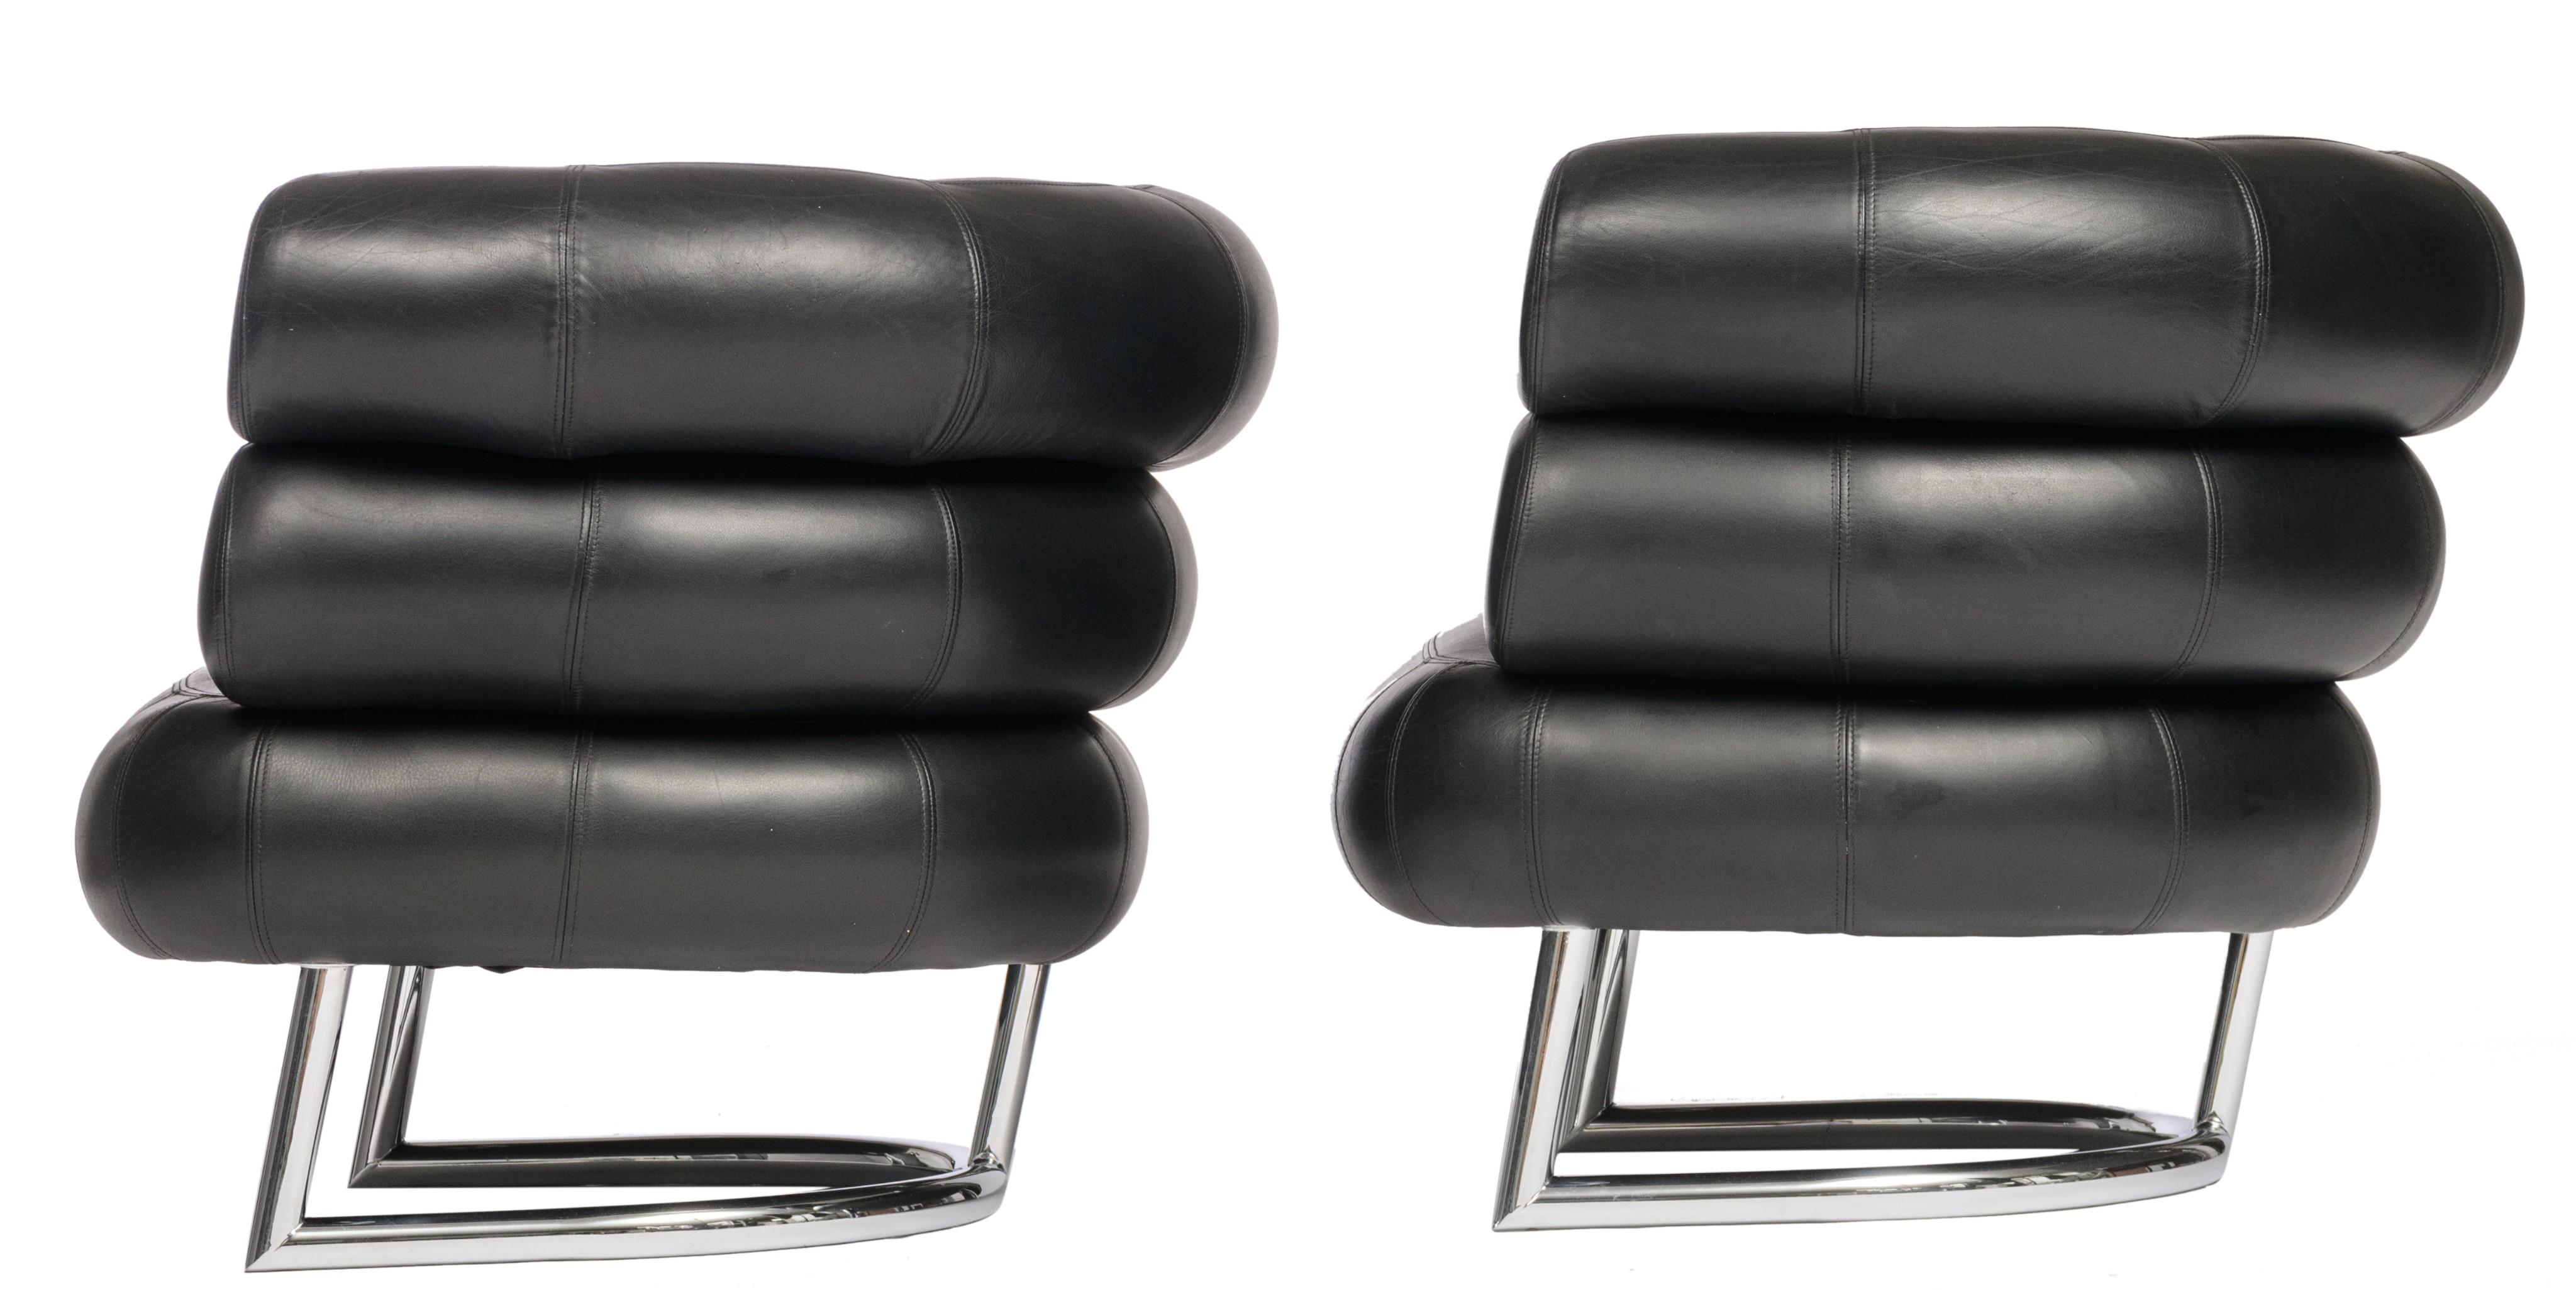 A pair of vintage 'Bibendum chair', designed by Eileen Grey in 1921, H 70 - W 92 cm - Image 3 of 9